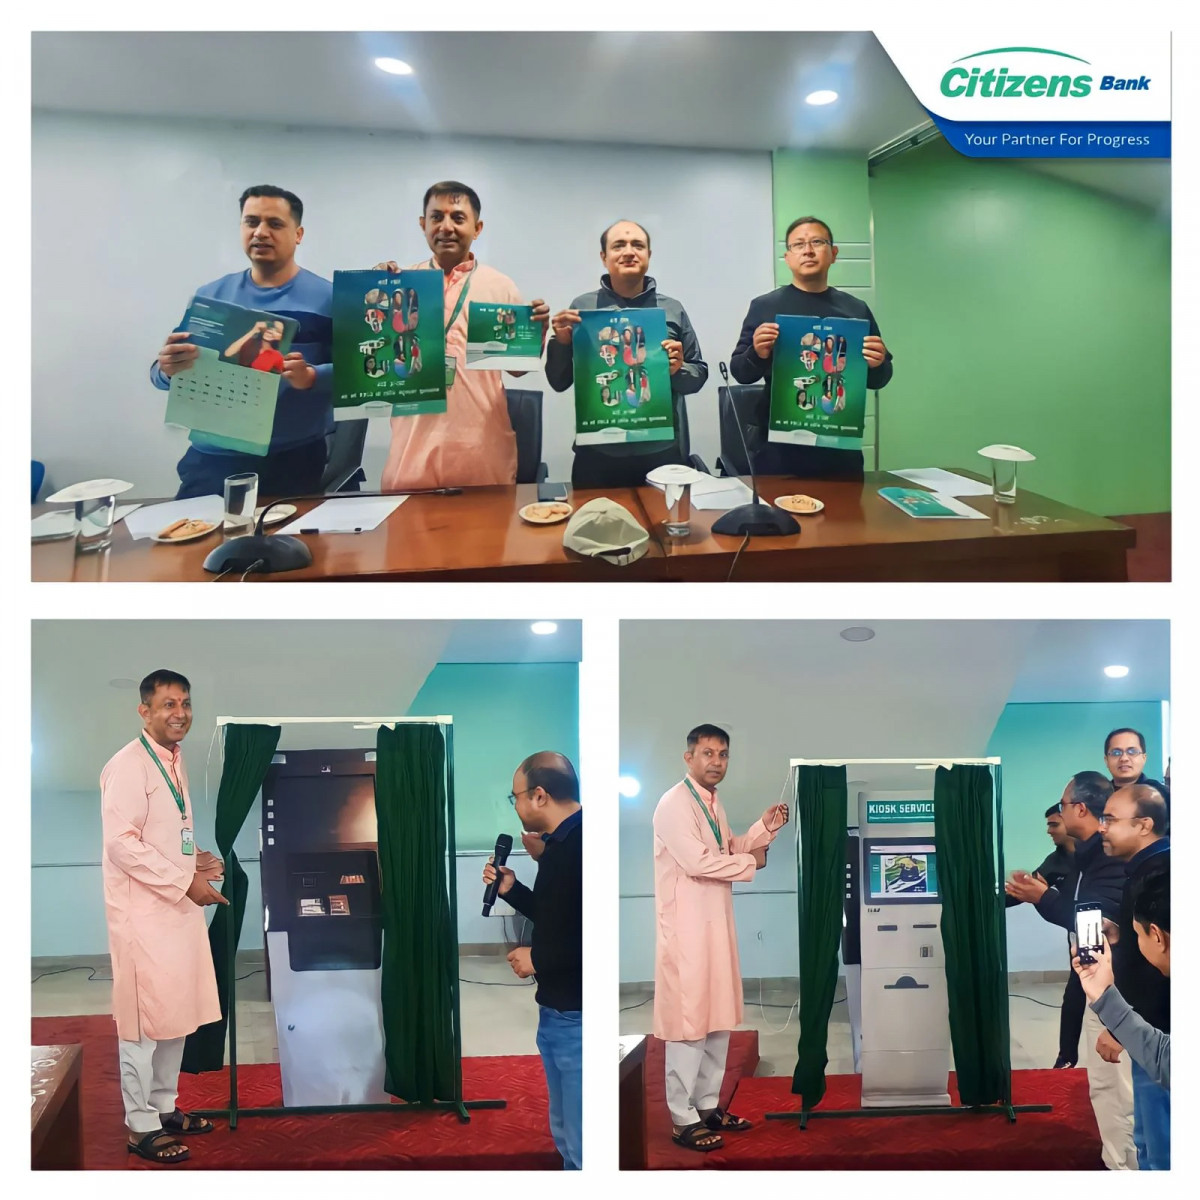 Citizens Bank extended two services simultaneous